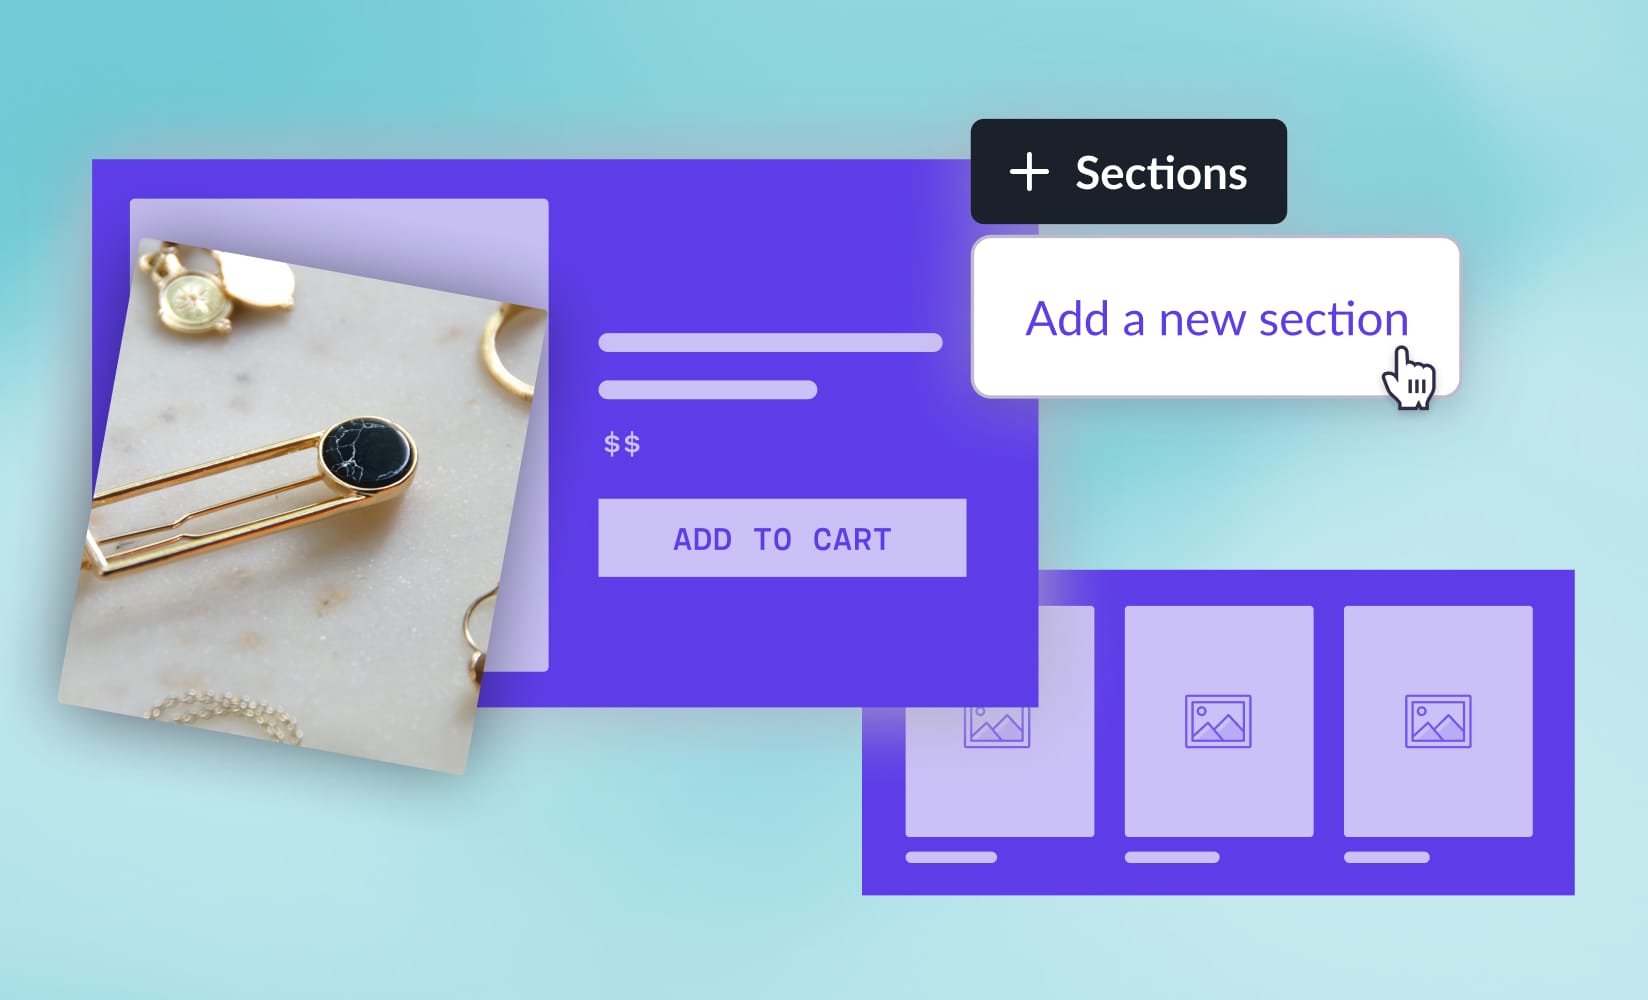 62a7704e1ca2108631b5bb12 Shopify Sections What They Are How to Add Them to Your Store shopify sections